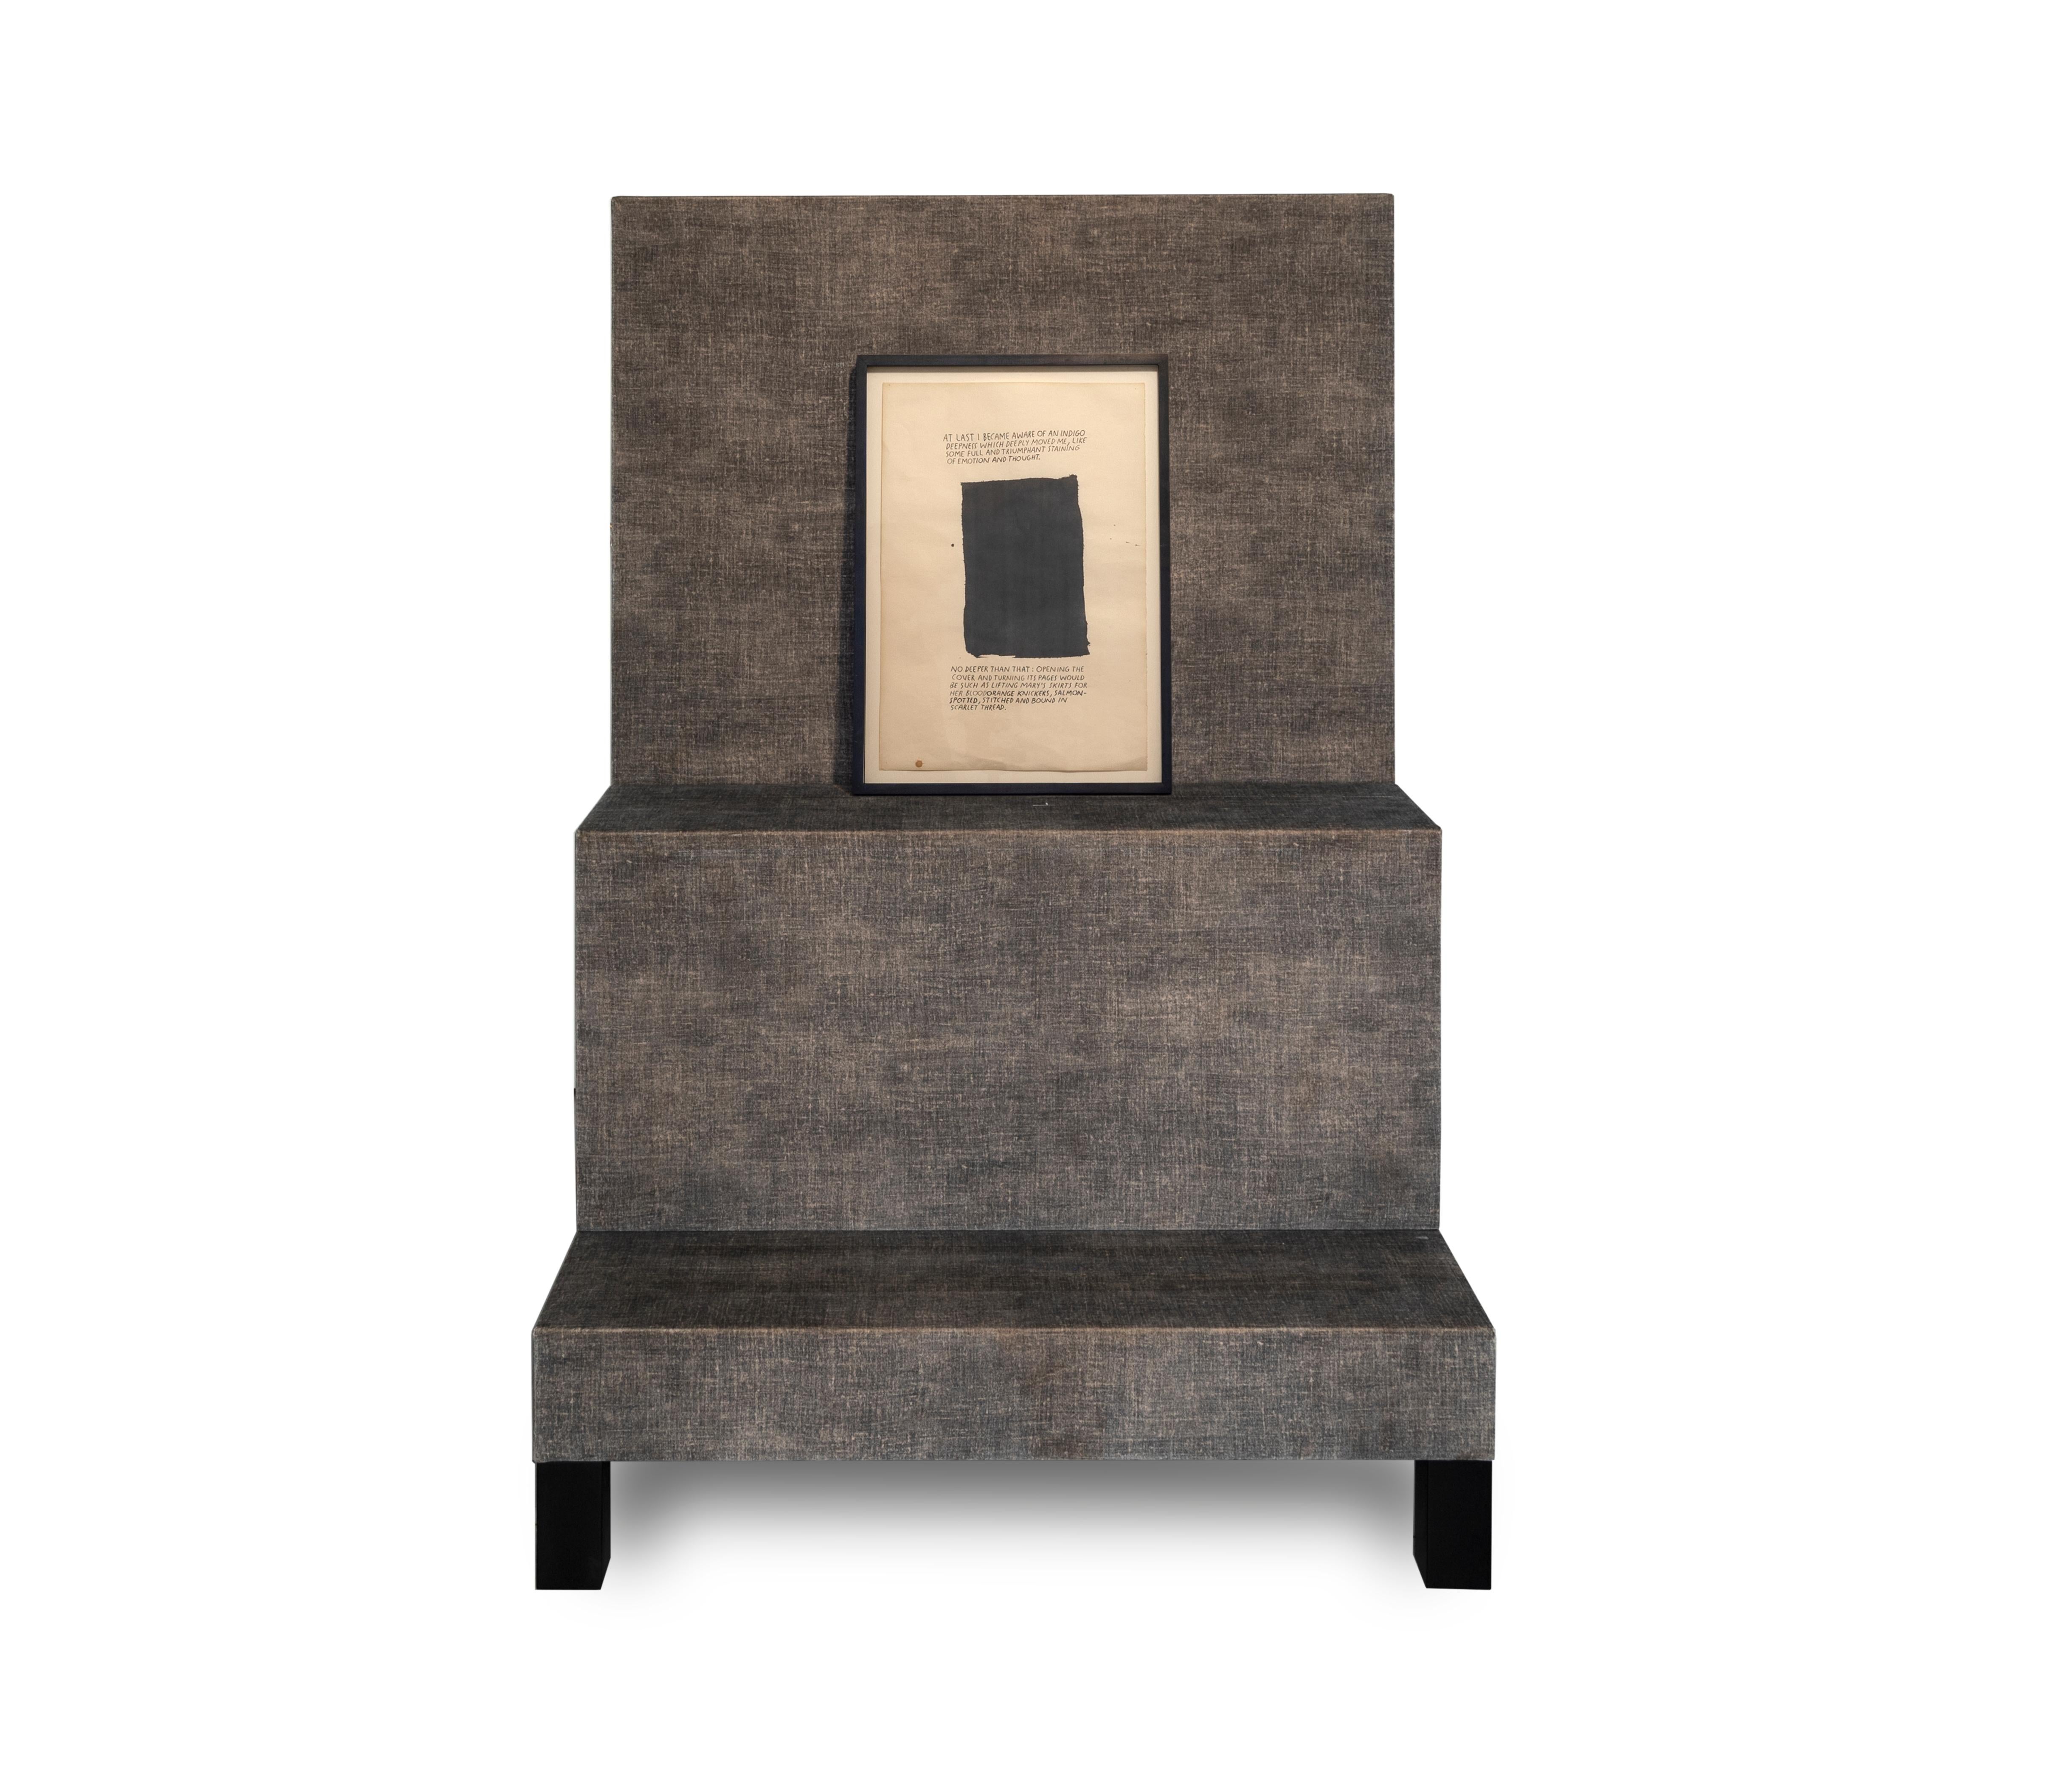 A fully upholstered easel with a central portion that can be removed to display small or large framed artwork. Blackened hardwood legs.

Made to order and handcrafted in the USA. Available in a vintage effect cotton velvet. 

COM also available